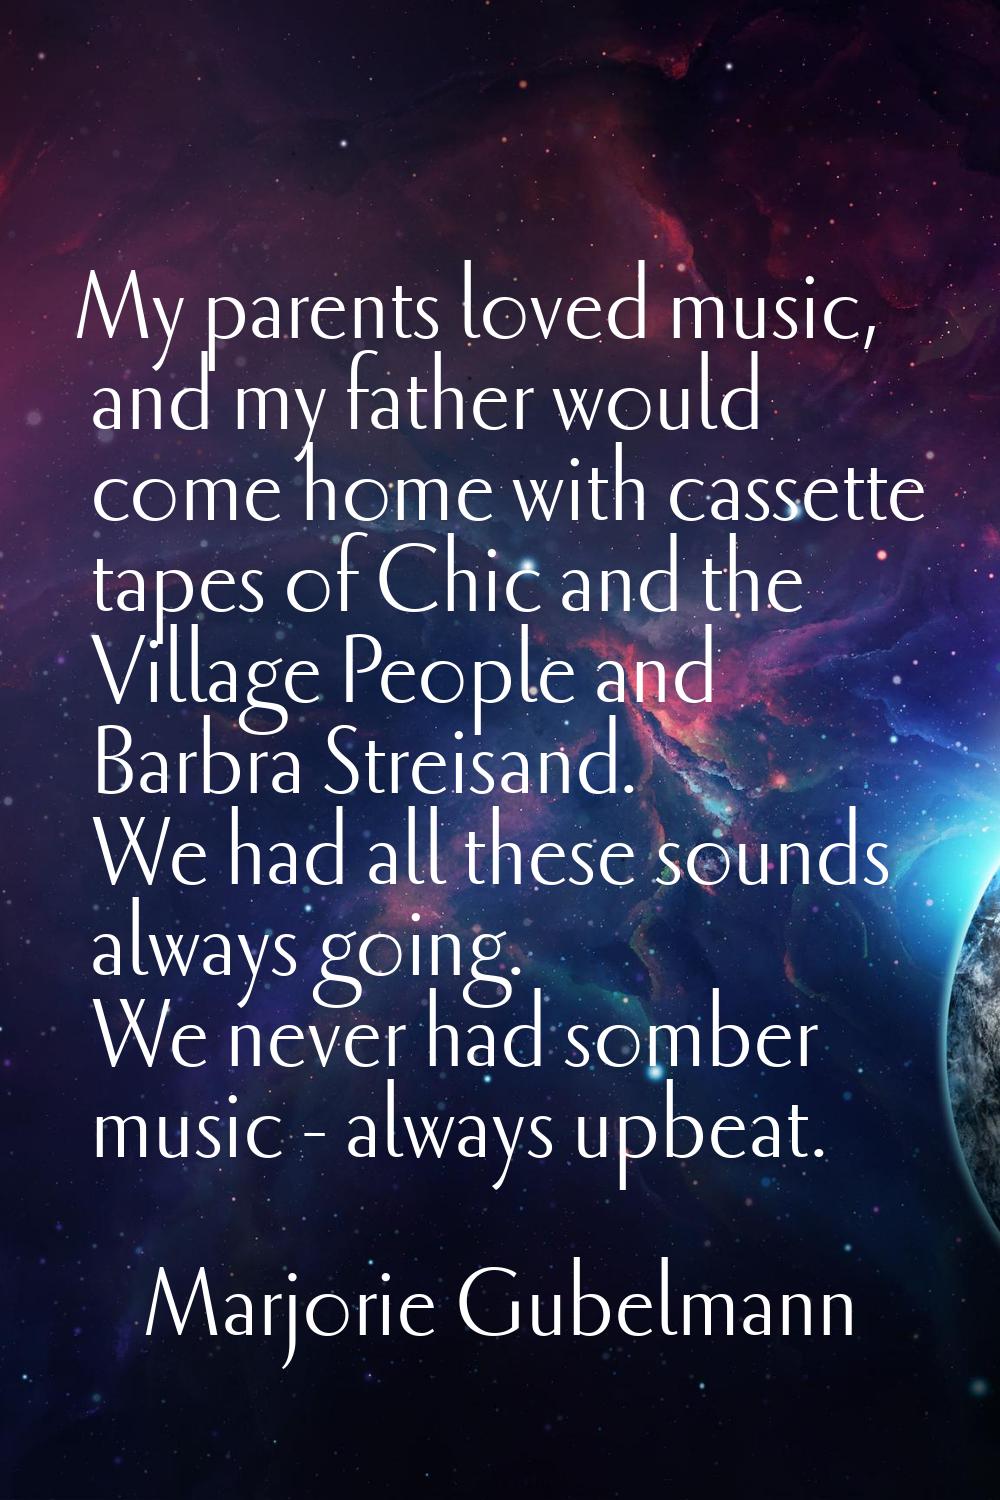 My parents loved music, and my father would come home with cassette tapes of Chic and the Village P